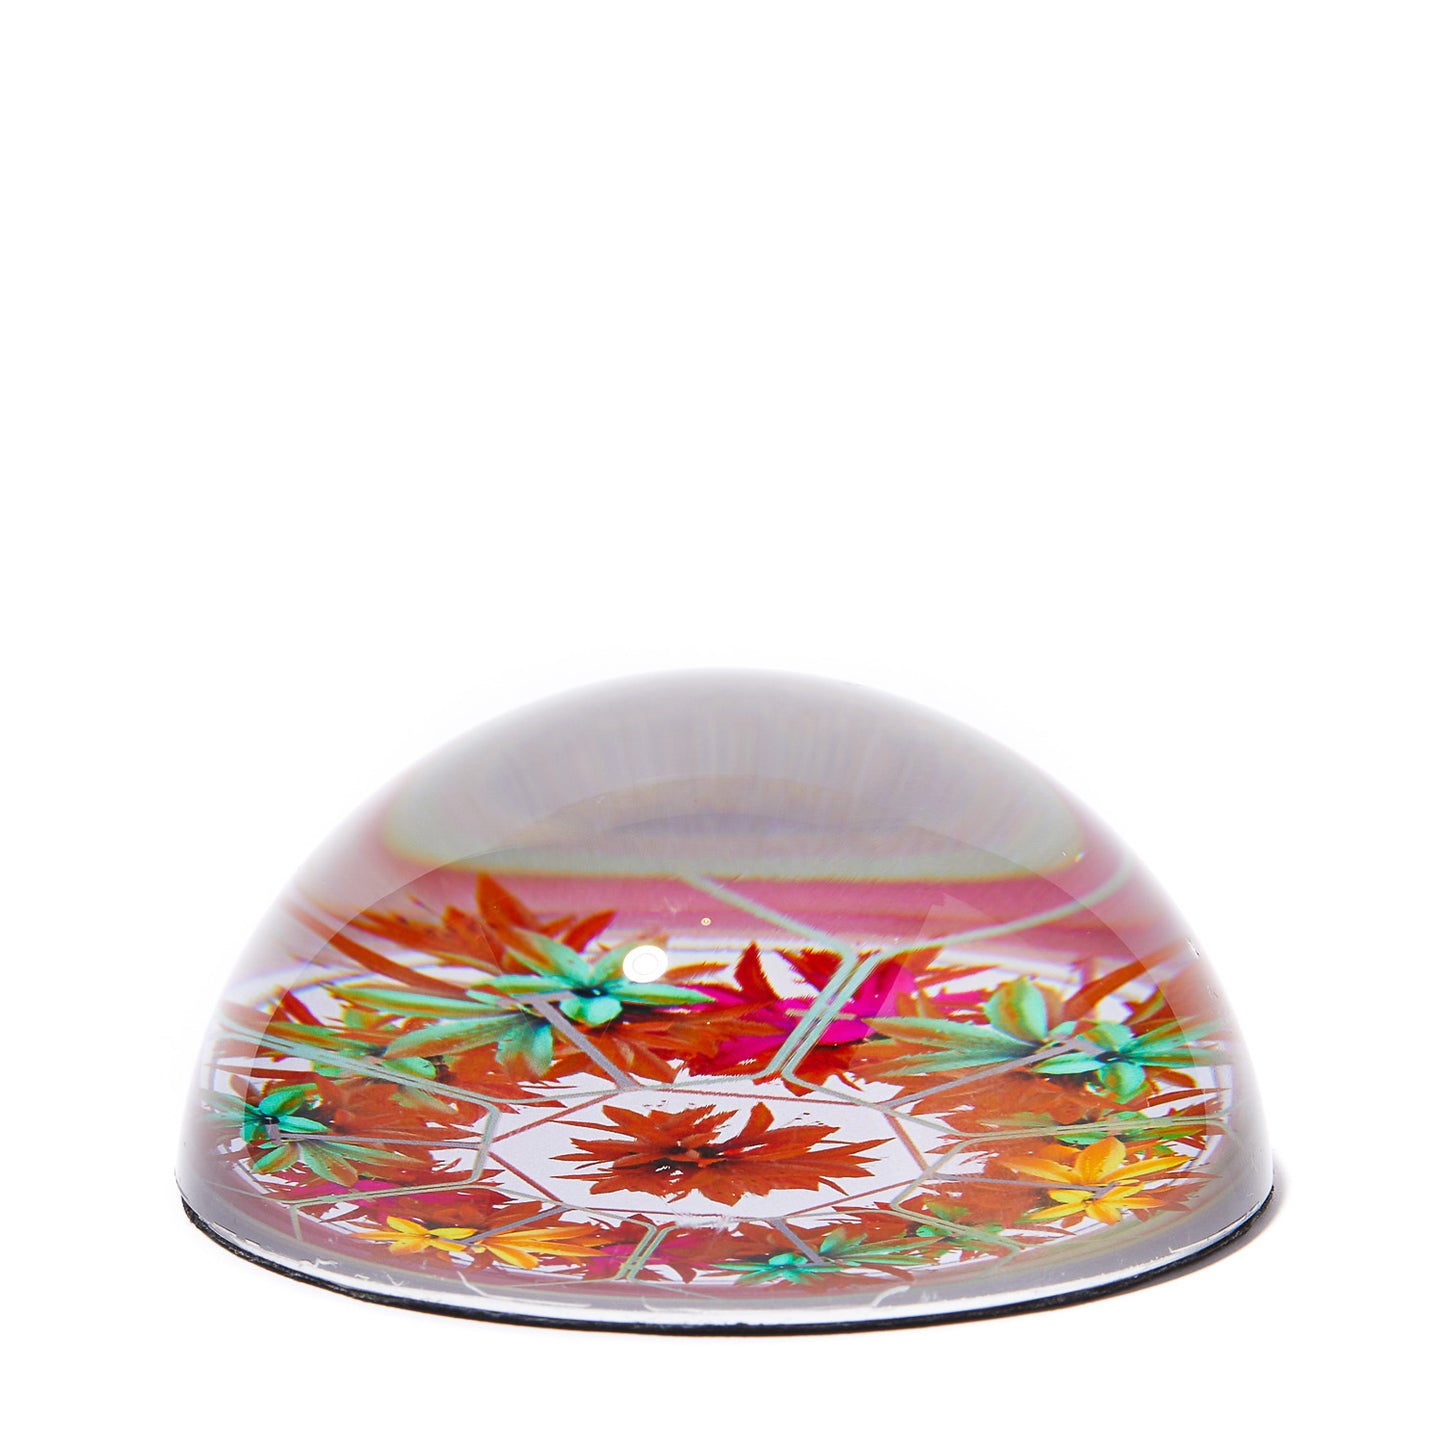 THE OBSERVATORY FLOWER PAPERWEIGHT